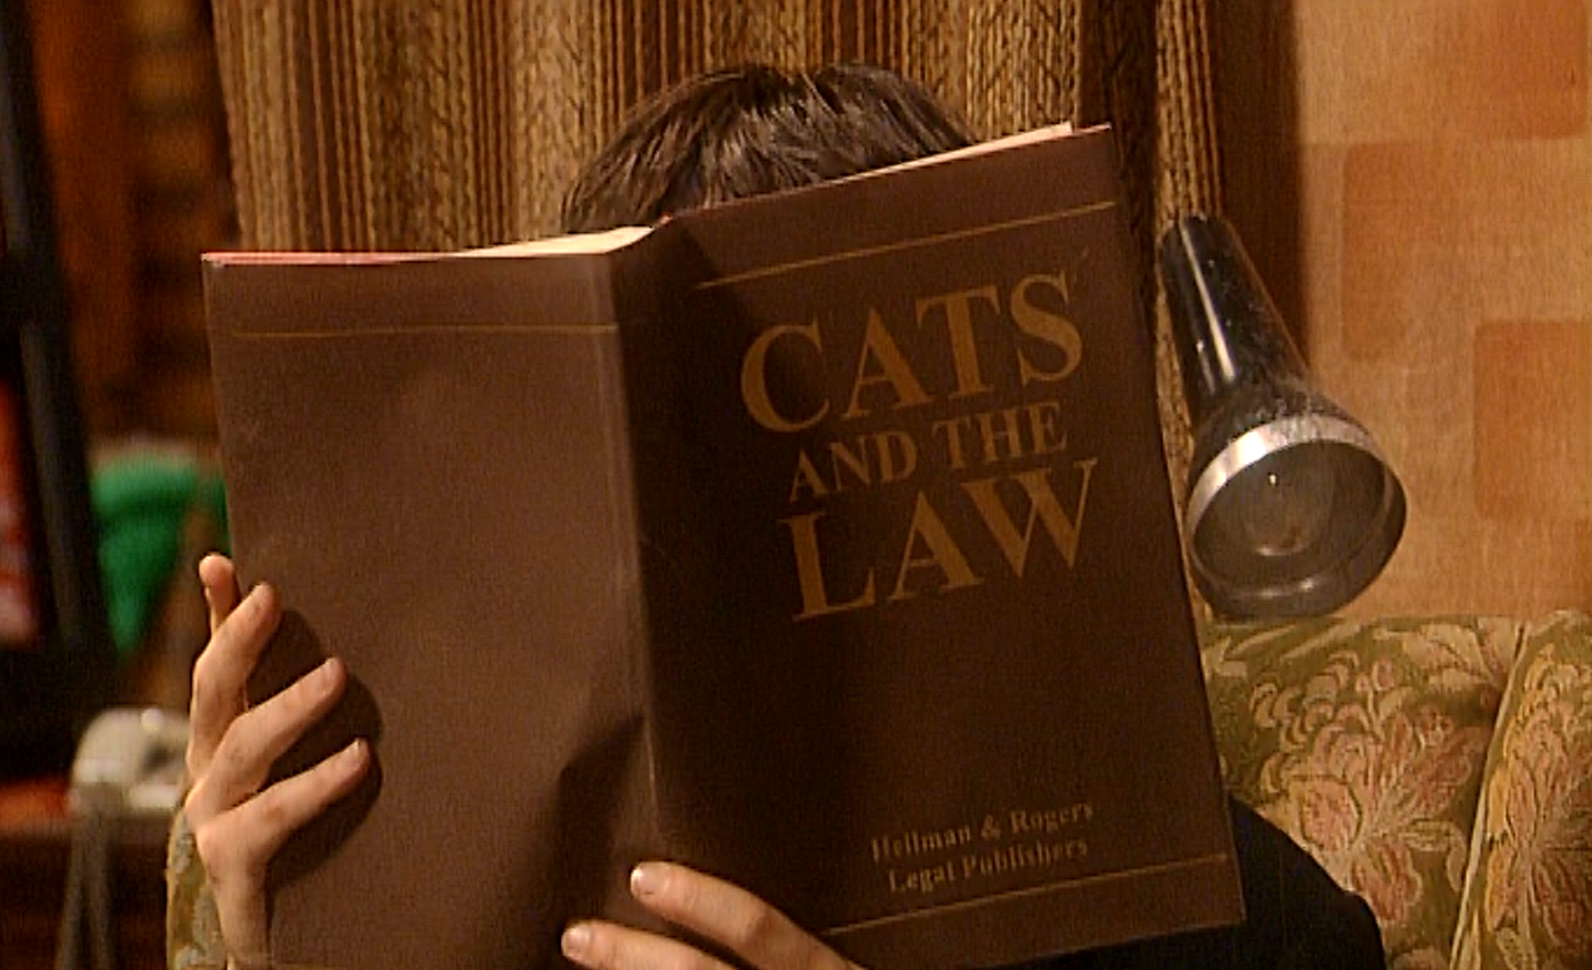 Cats And The Law